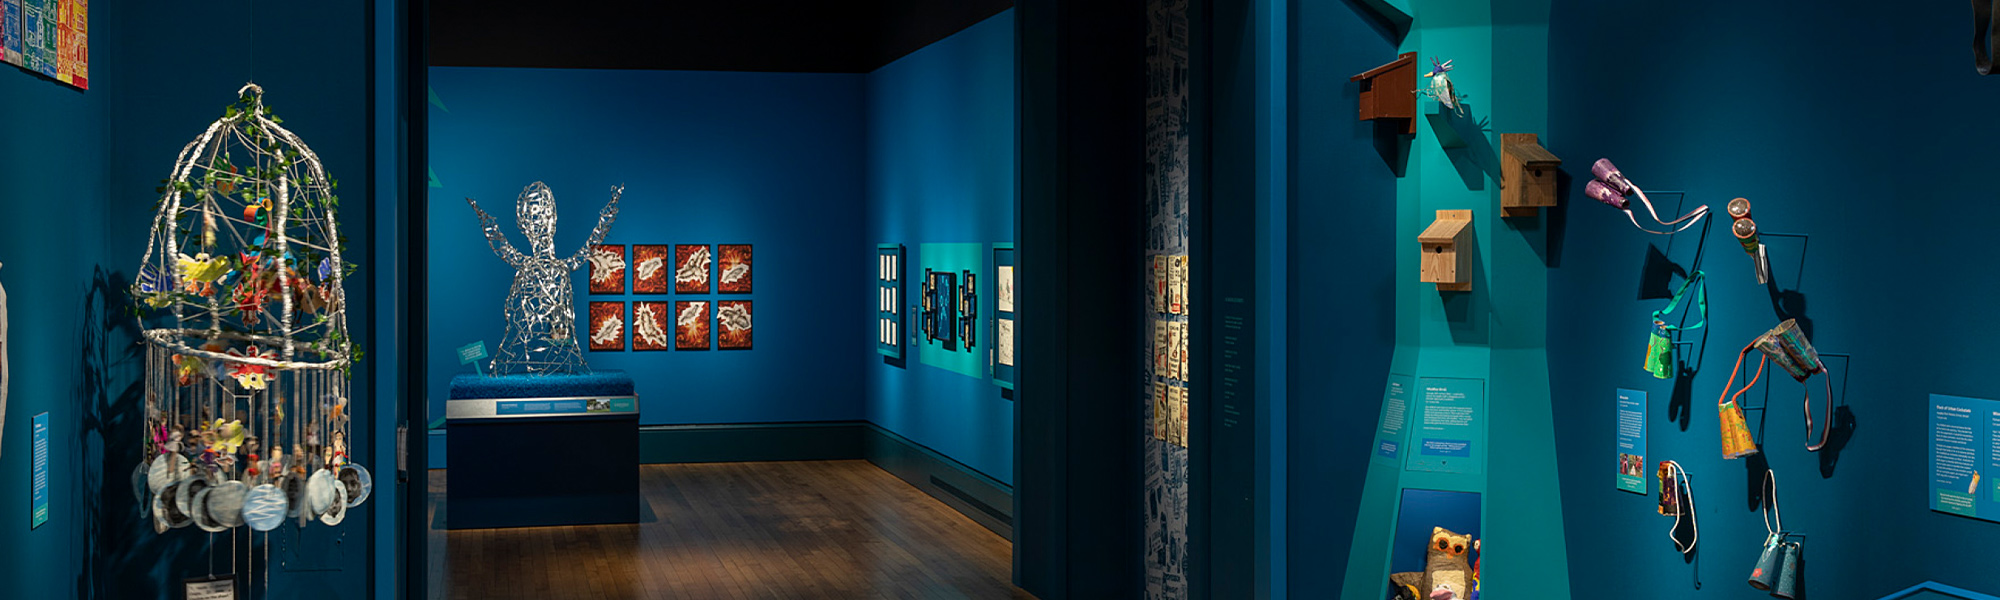 Exhibition with blue walls